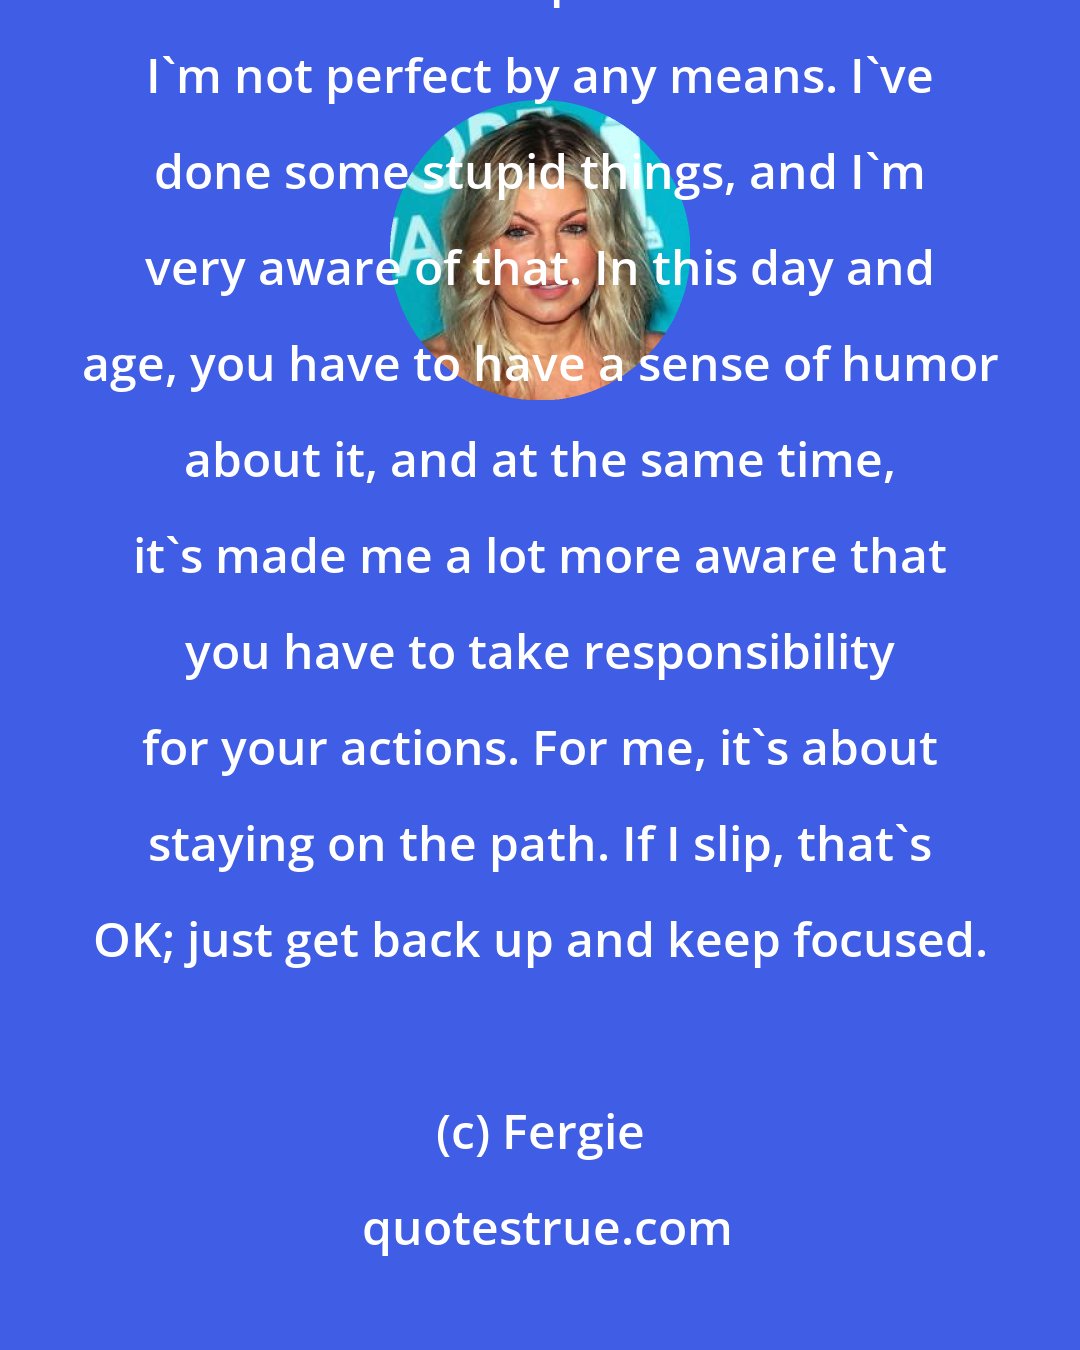 Fergie: Instead of my telling people what they should be doing, it makes more sense to be an inspiration to them. I'm not perfect by any means. I've done some stupid things, and I'm very aware of that. In this day and age, you have to have a sense of humor about it, and at the same time, it's made me a lot more aware that you have to take responsibility for your actions. For me, it's about staying on the path. If I slip, that's OK; just get back up and keep focused.